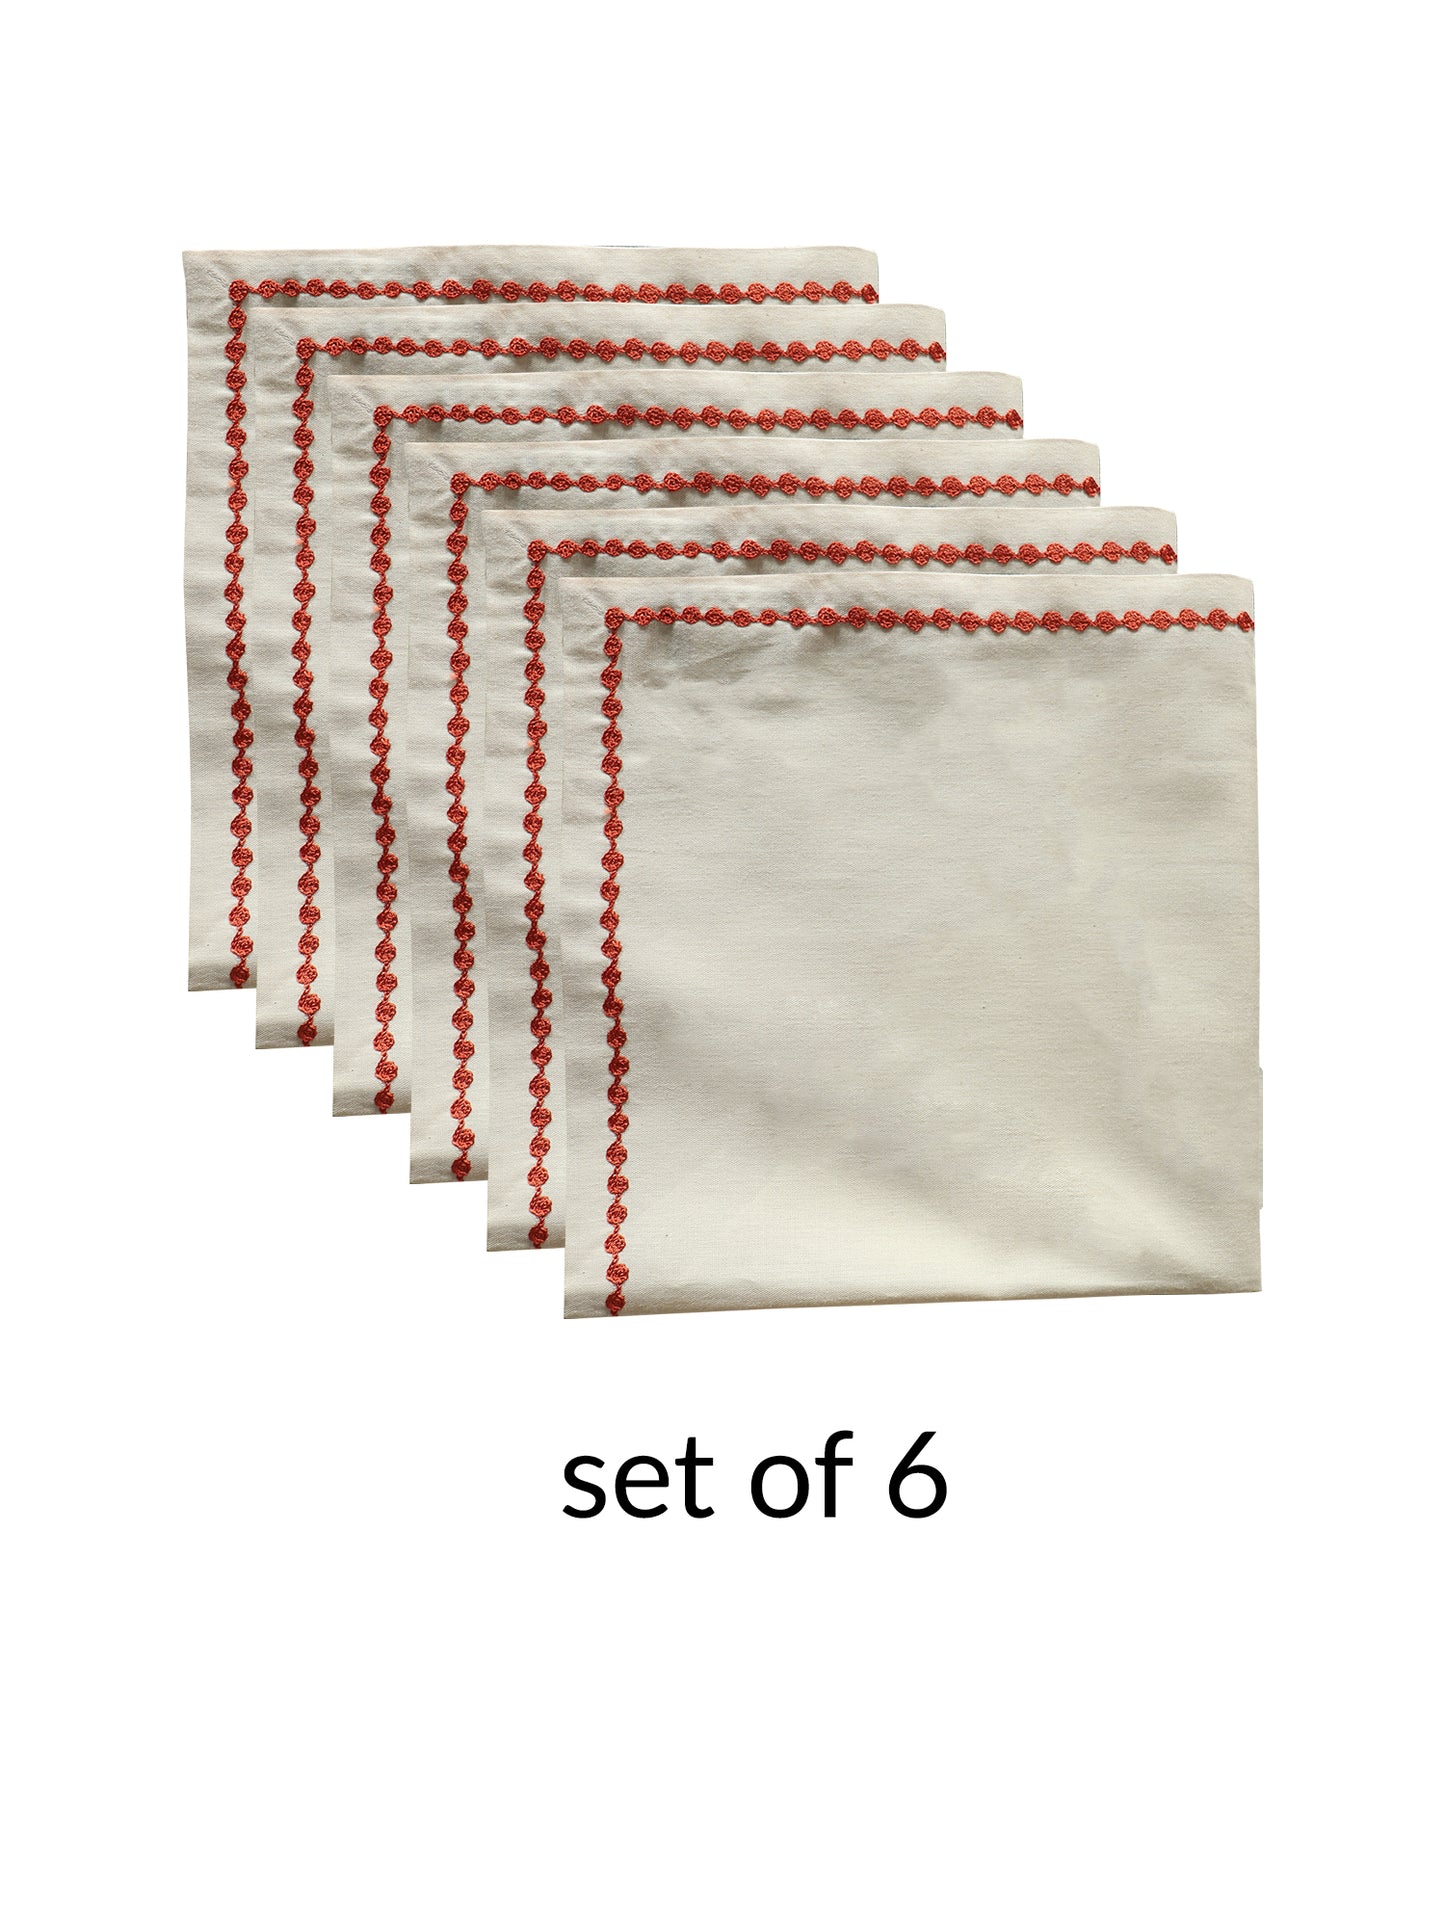 embroidered dinner napkins in rust and beige contrast colors - 16x16 inch 